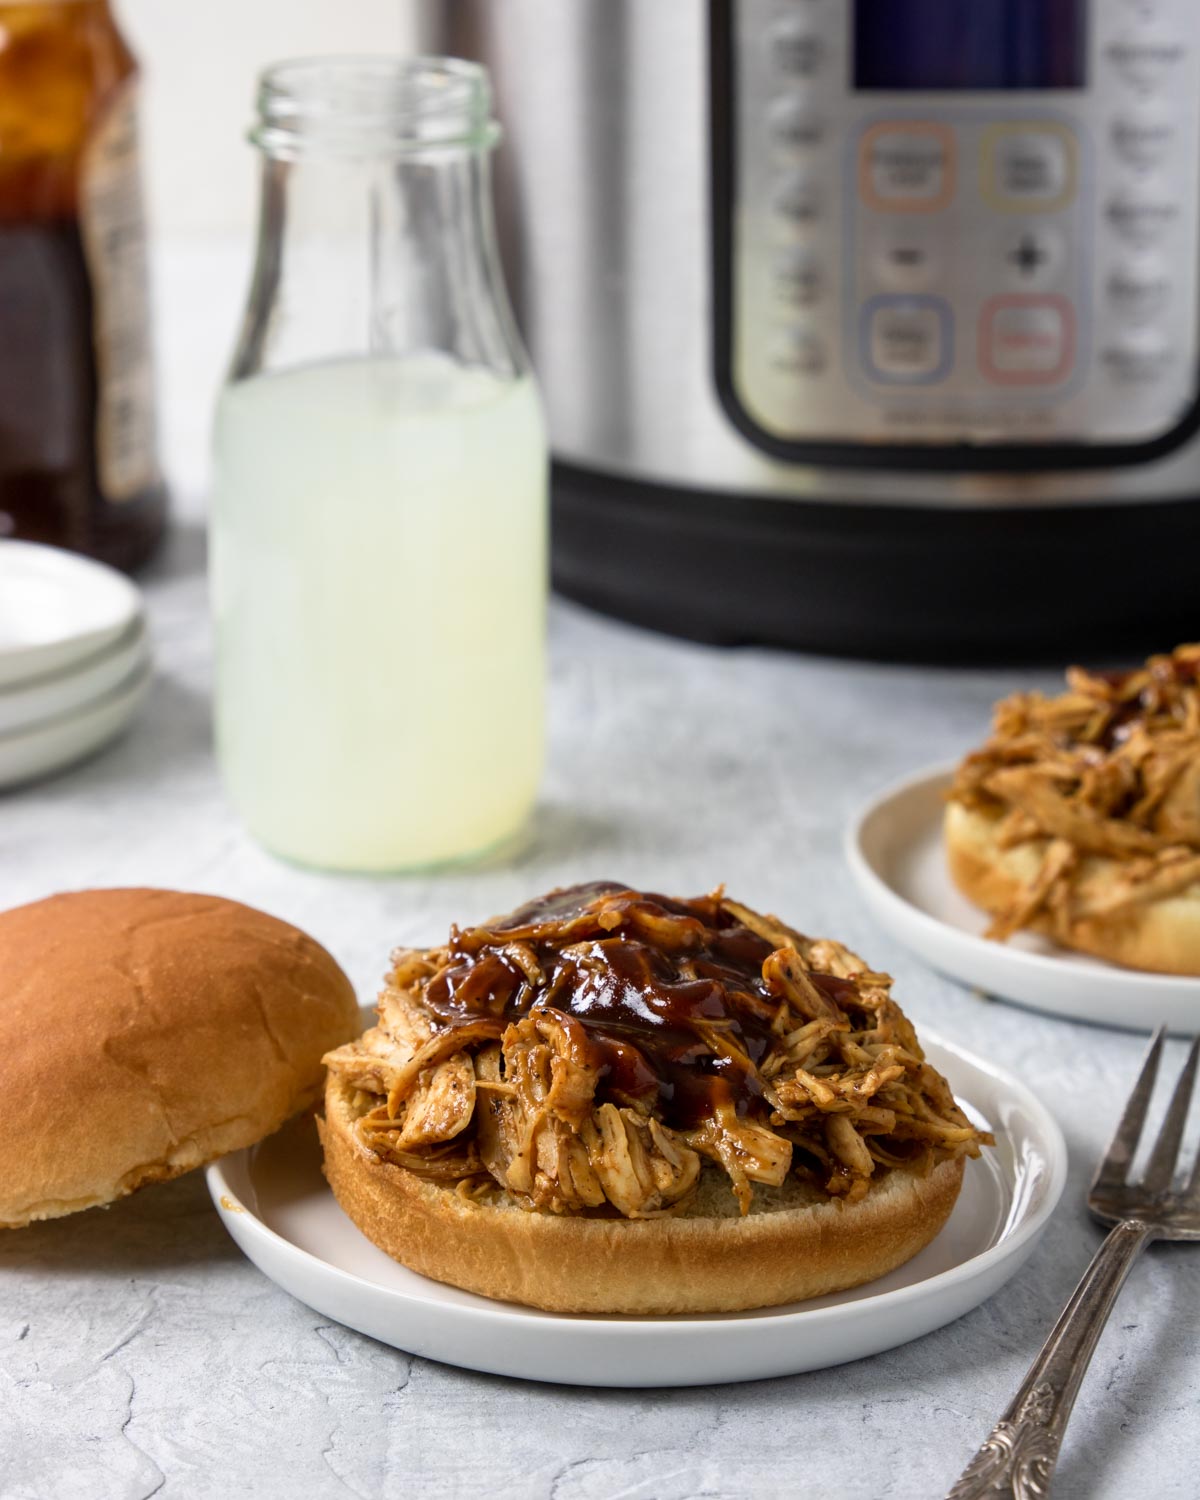 BBQ chicken sandwiches with the instant pot in the background